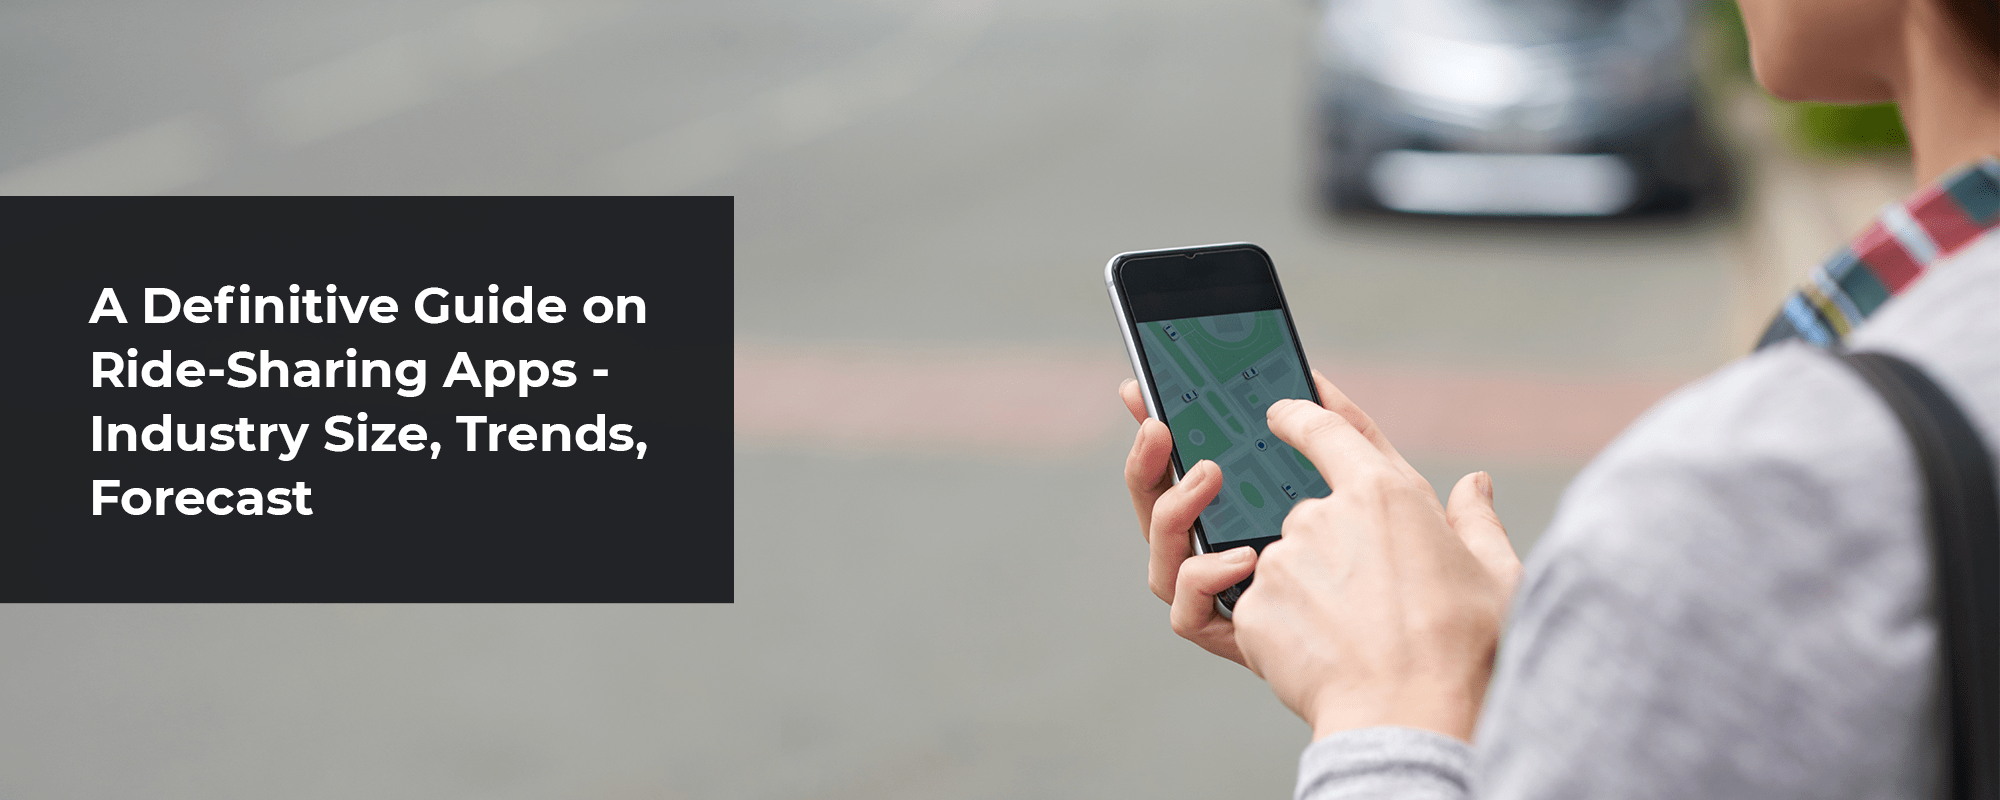 A Definitive Guide on Ride-sharing Apps – Industry Size, Trends, Forecast